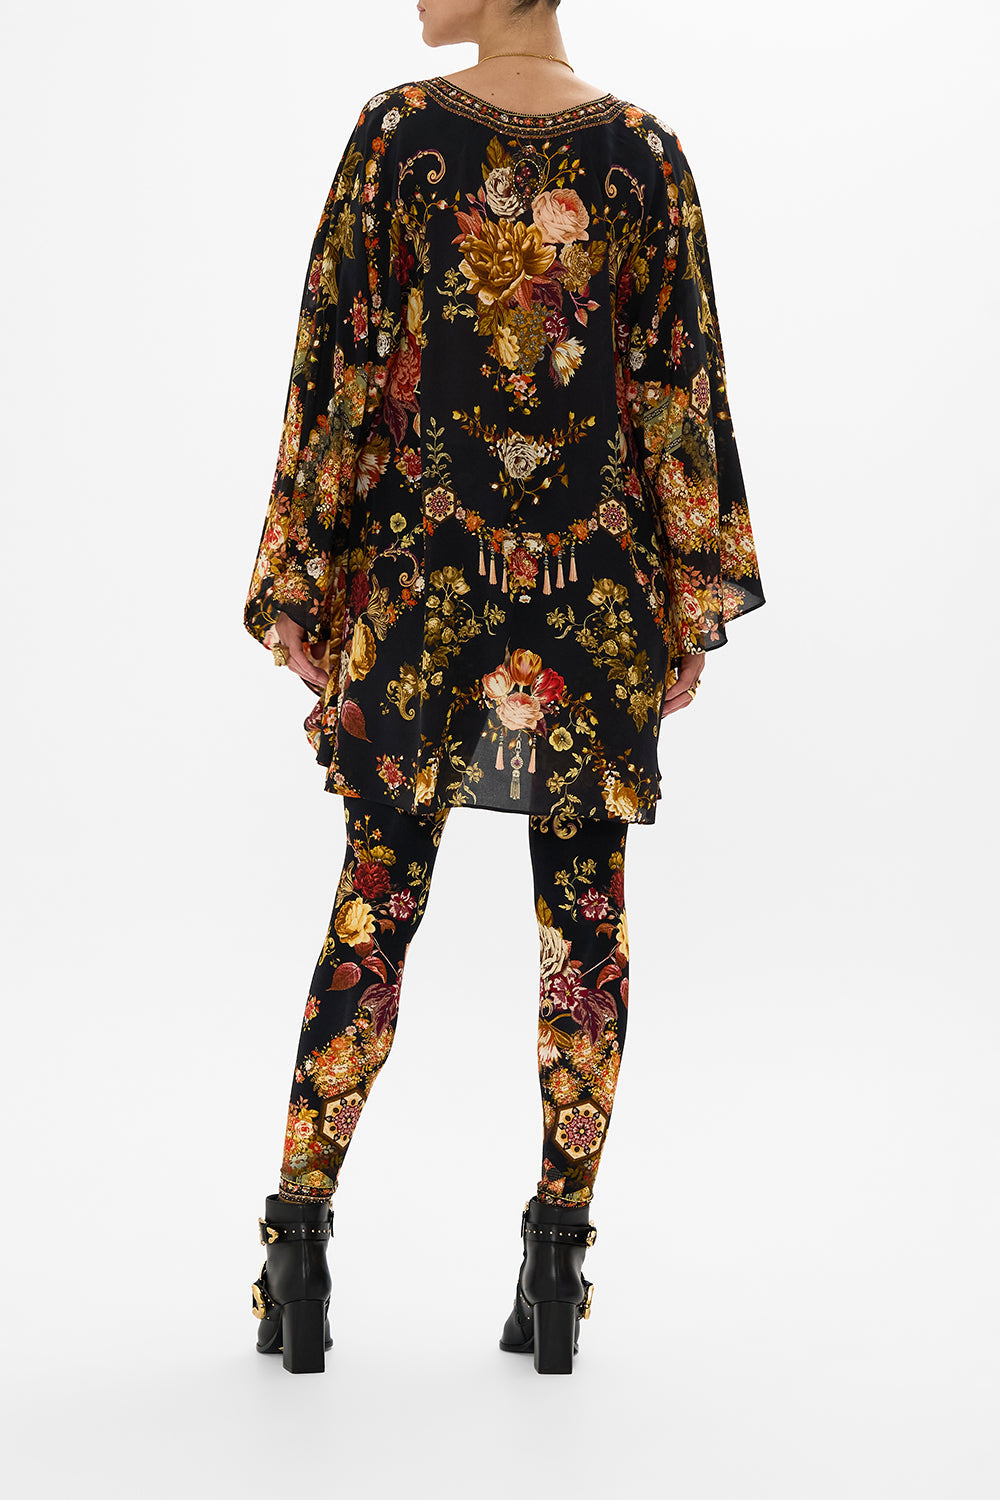 CAMILLA floral leggings in Stitched In Time print.